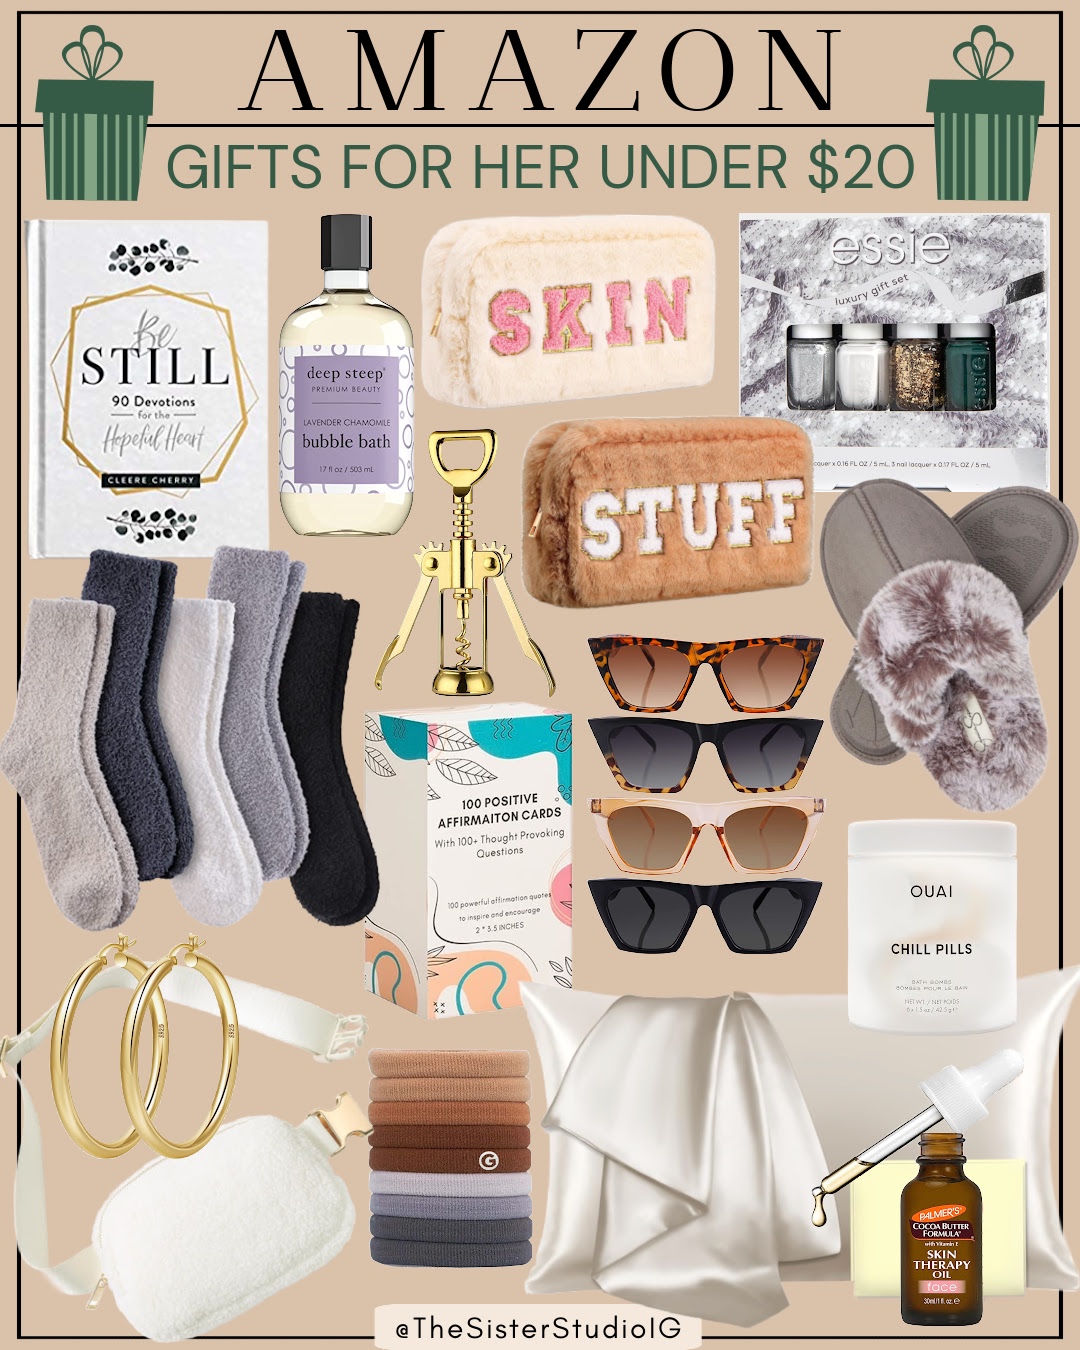 GIFTS FOR MEN - The Sister Studio